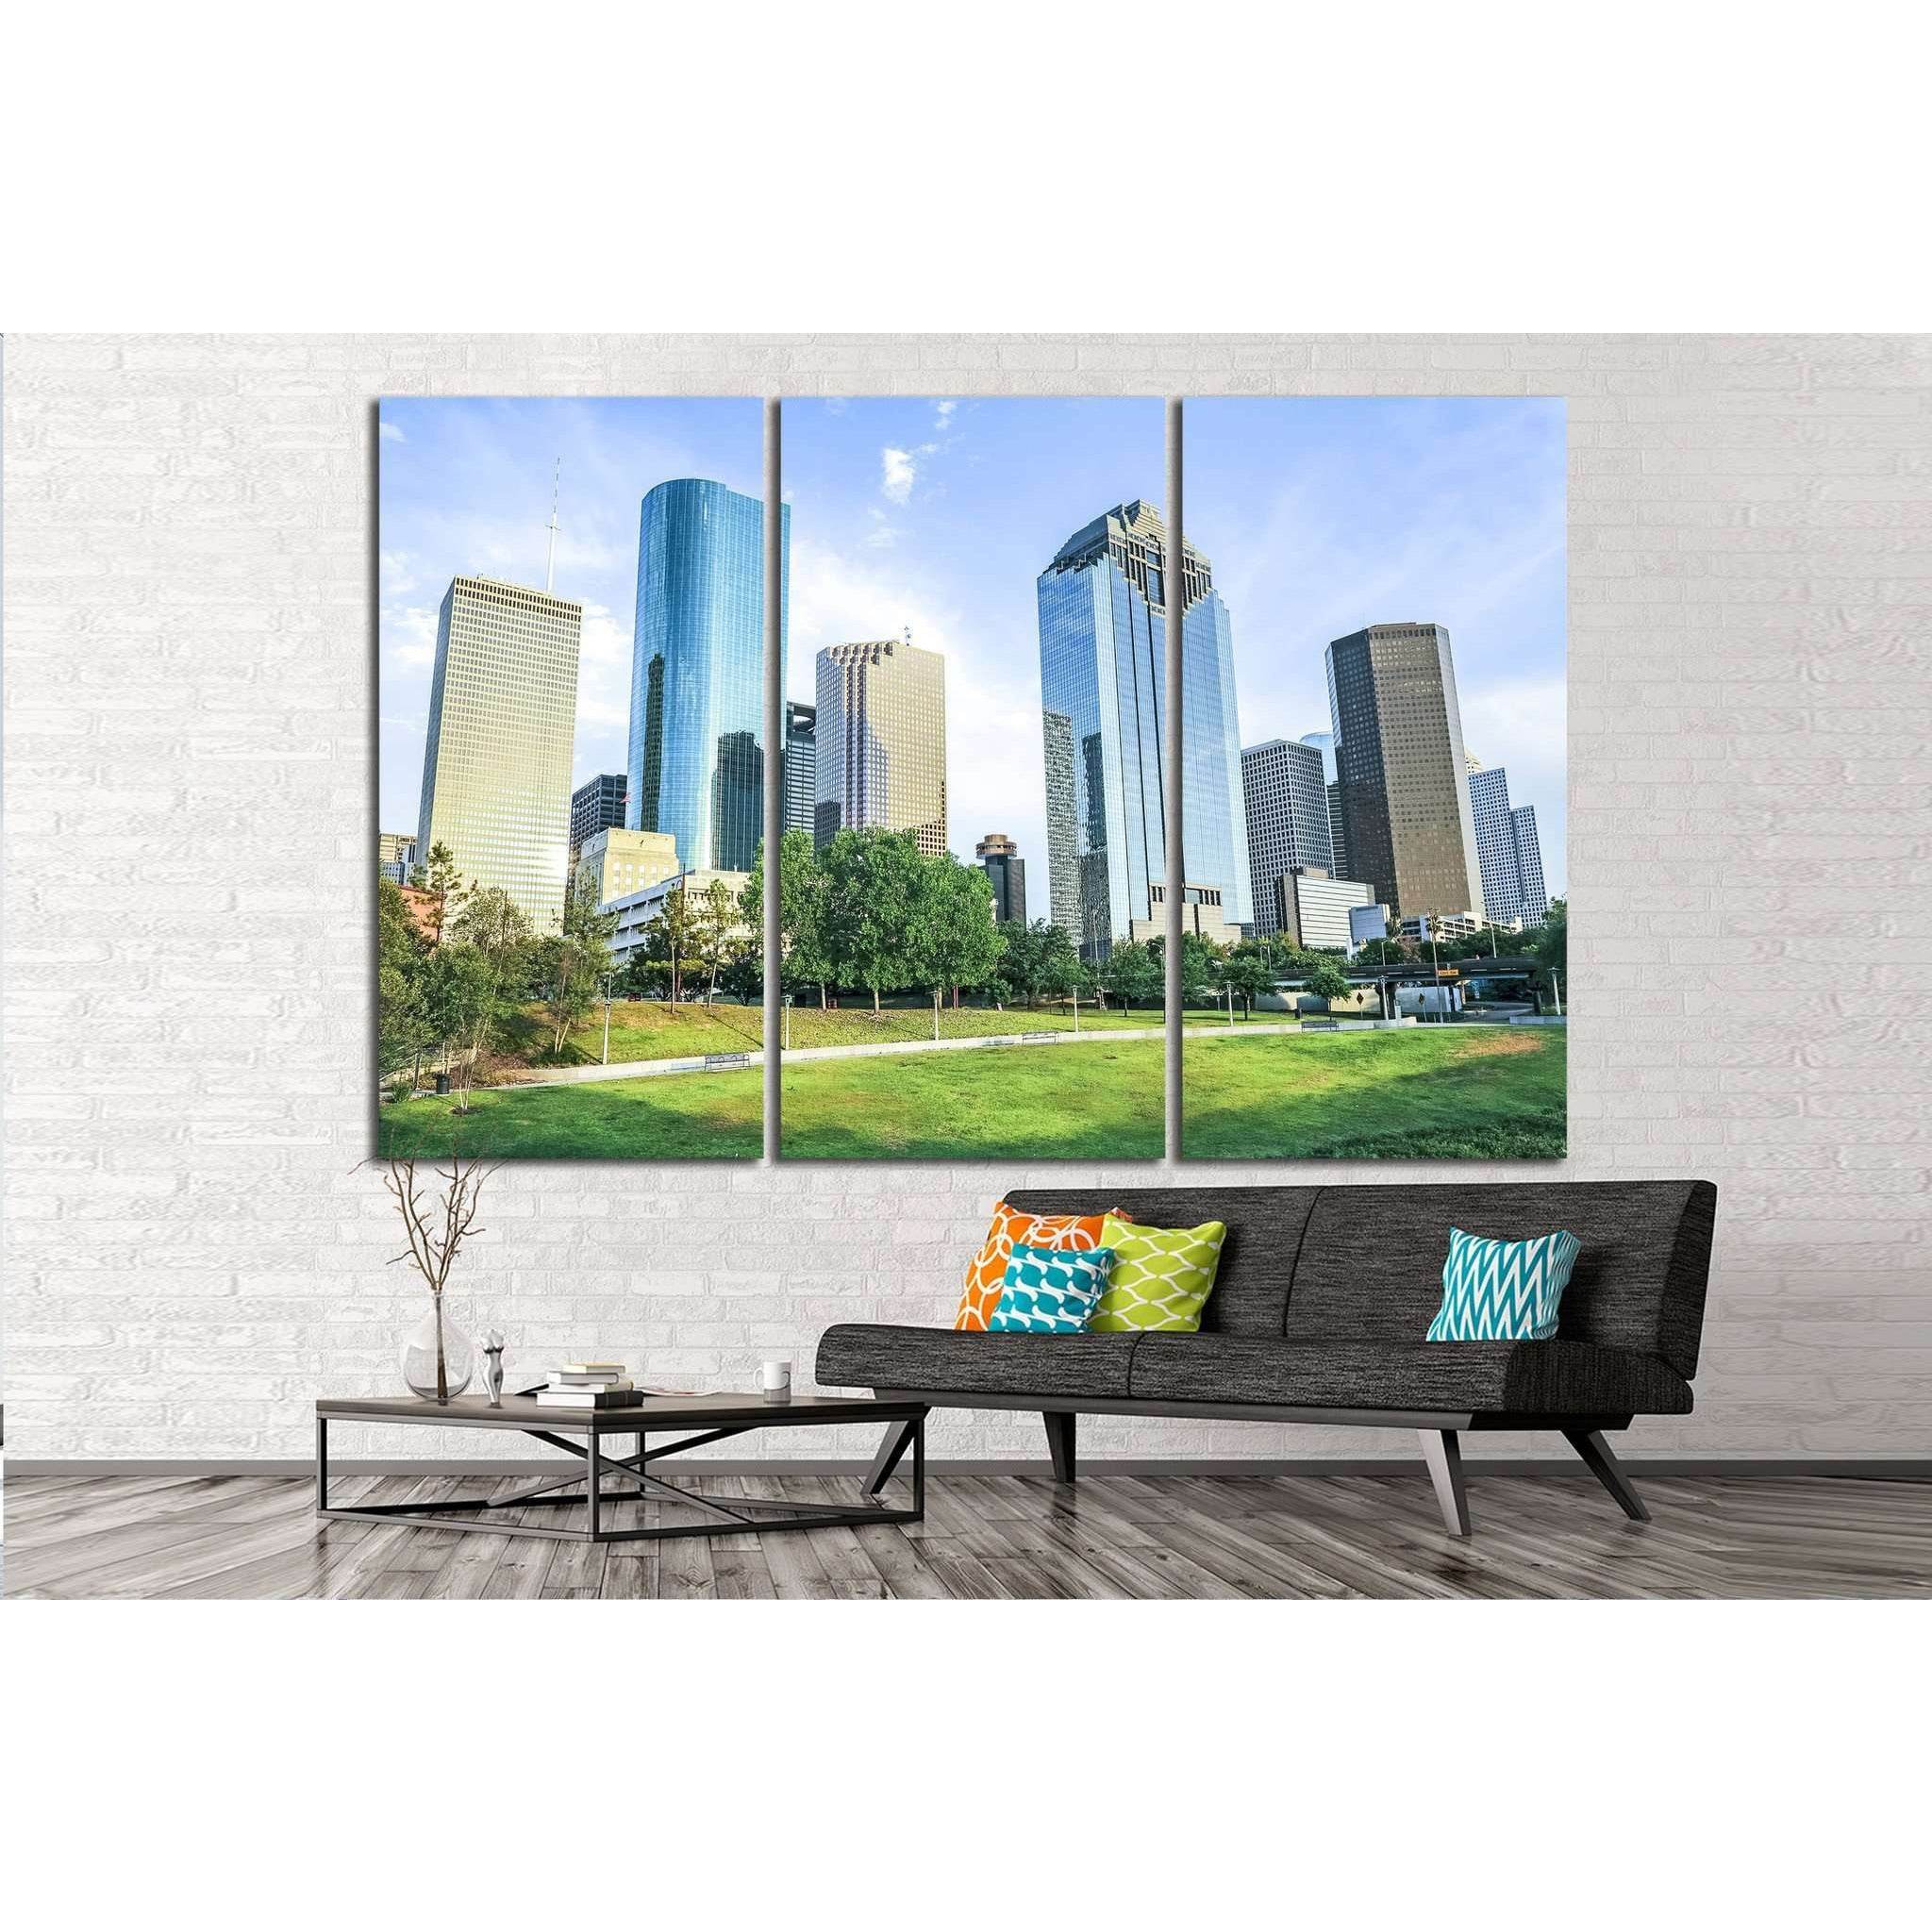 Houston, Texas in daytime №893 Ready to Hang Canvas Print